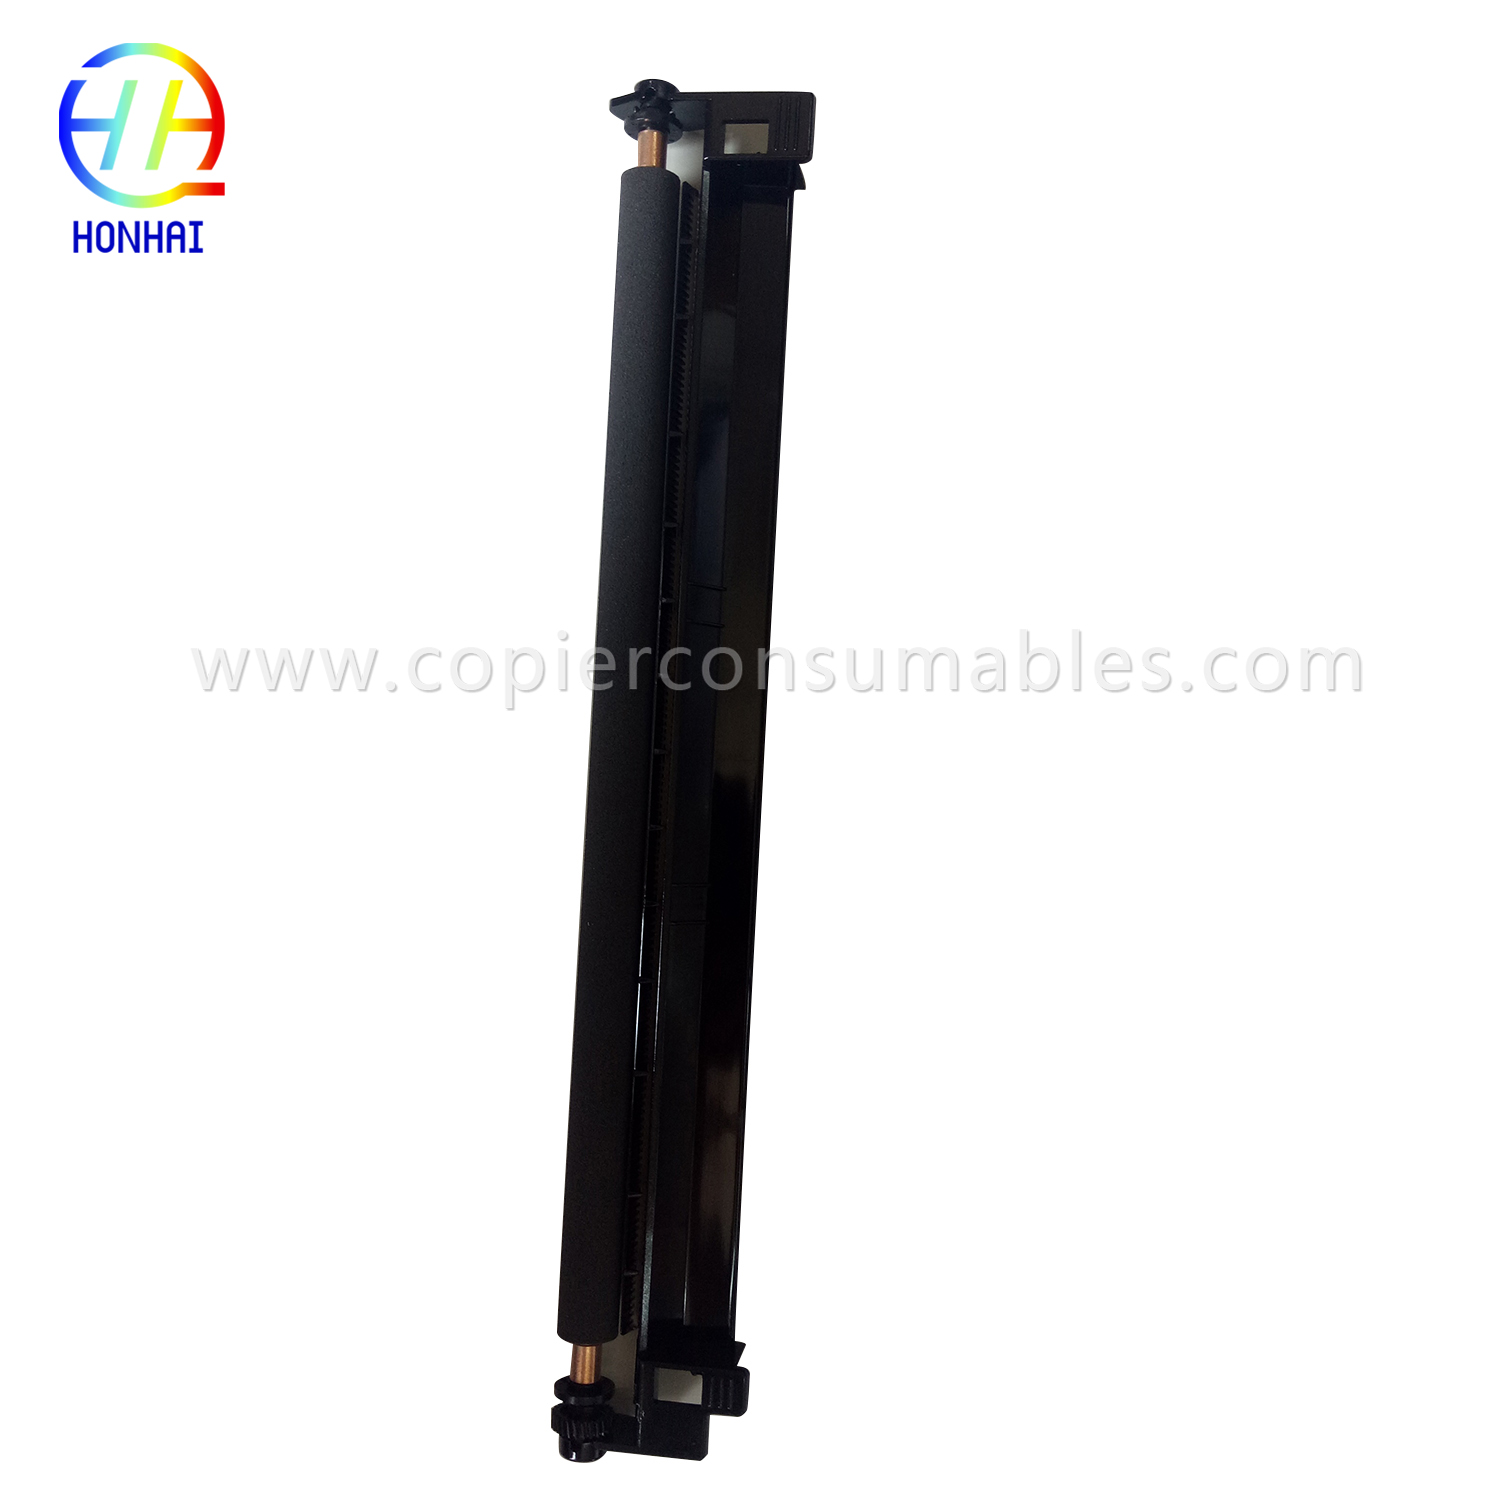 Transfer Roller Assembly for Ricoh Aficio 1022 1027 2022 2027 220 270 3025 3030 MP2510 2550 2852 (B2093831) (1)